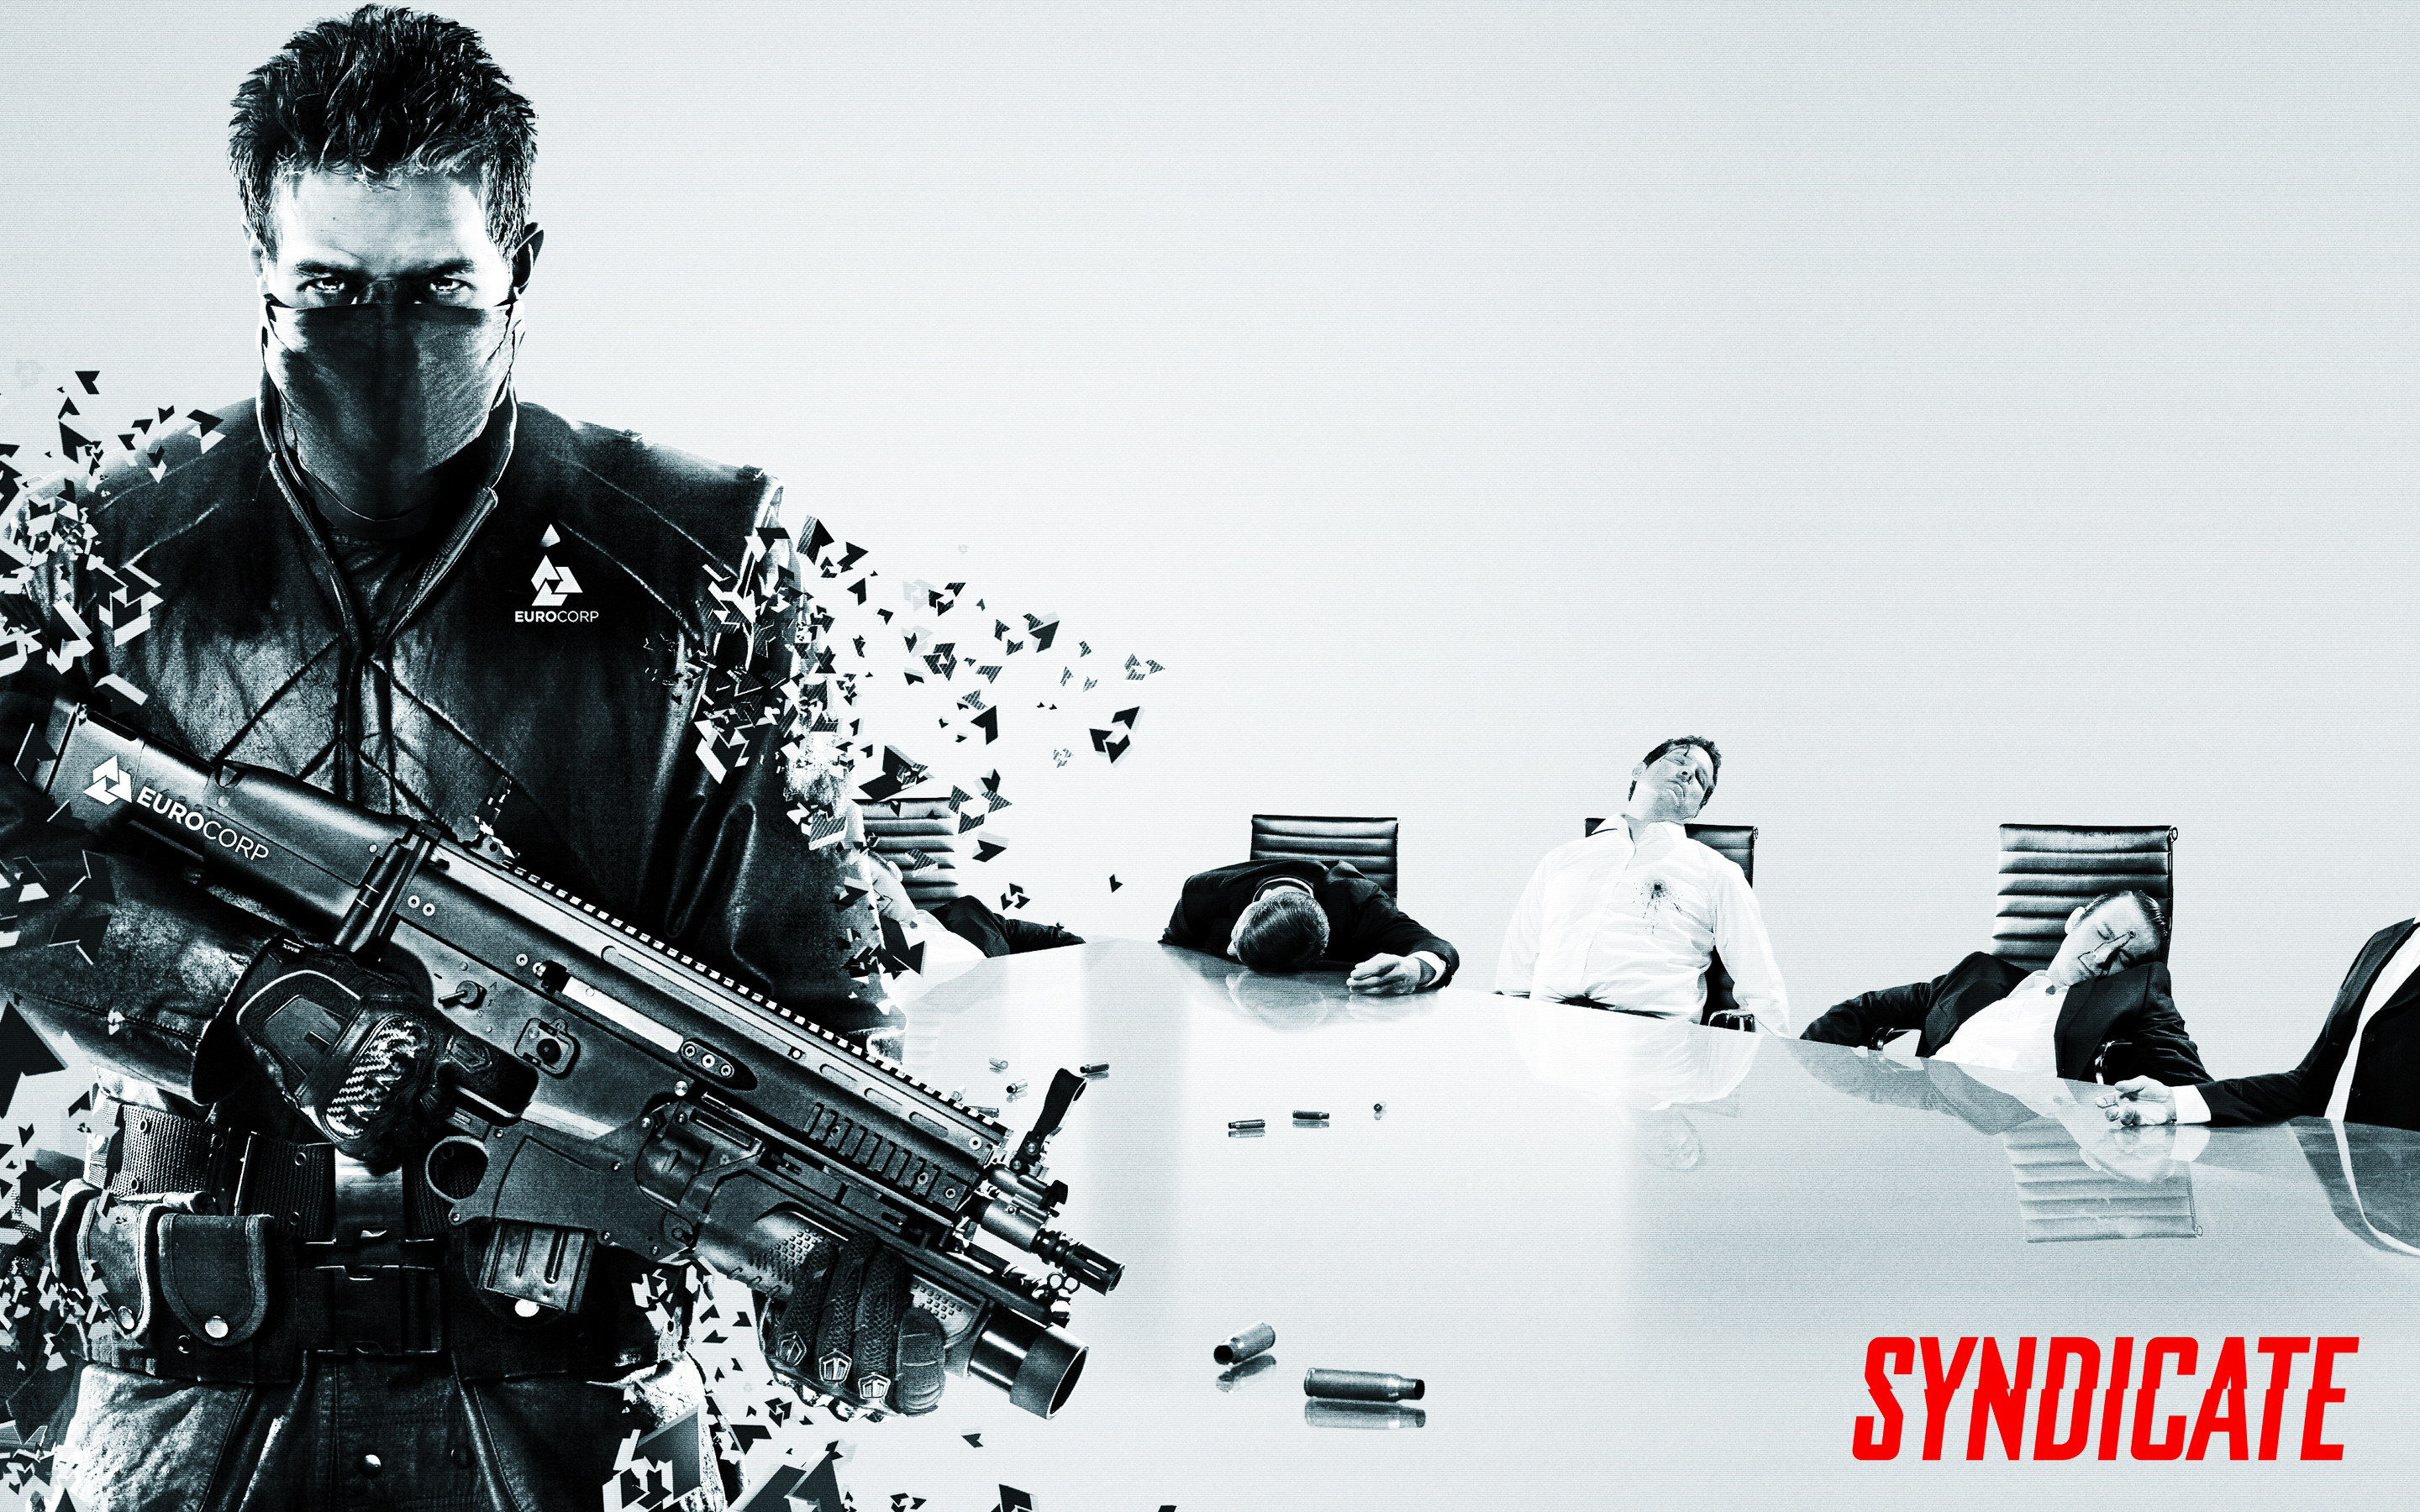 Syndicate Video Game Wallpaper HD